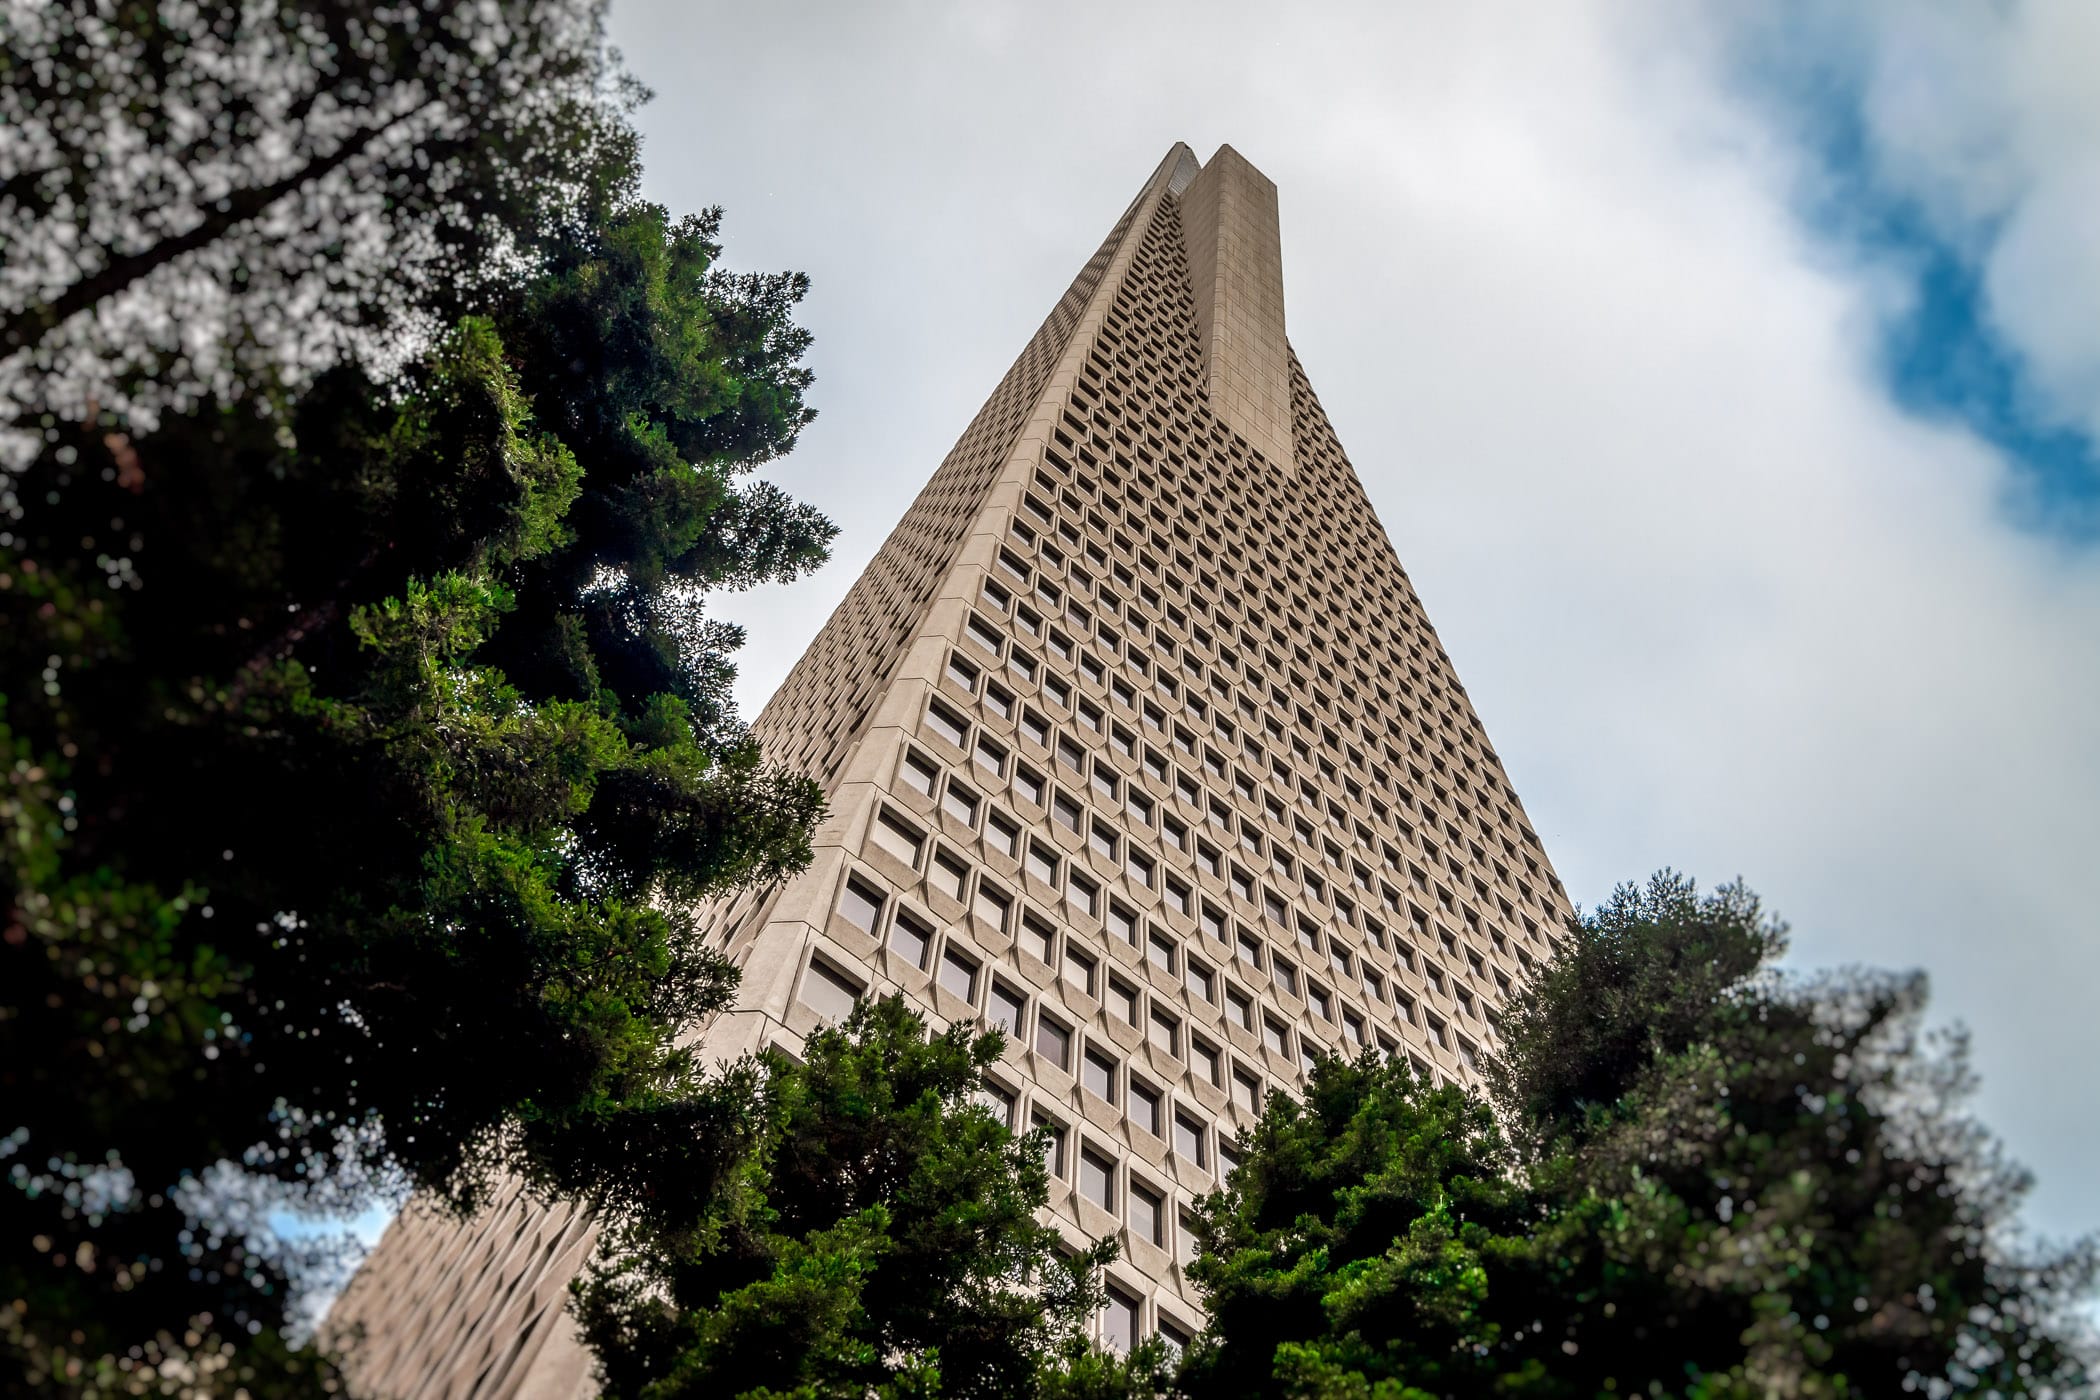 San Francisco's tallest building, the Transamerica Pyramid, rises above the neighboring Redwood Park into the grey Northern California sky.